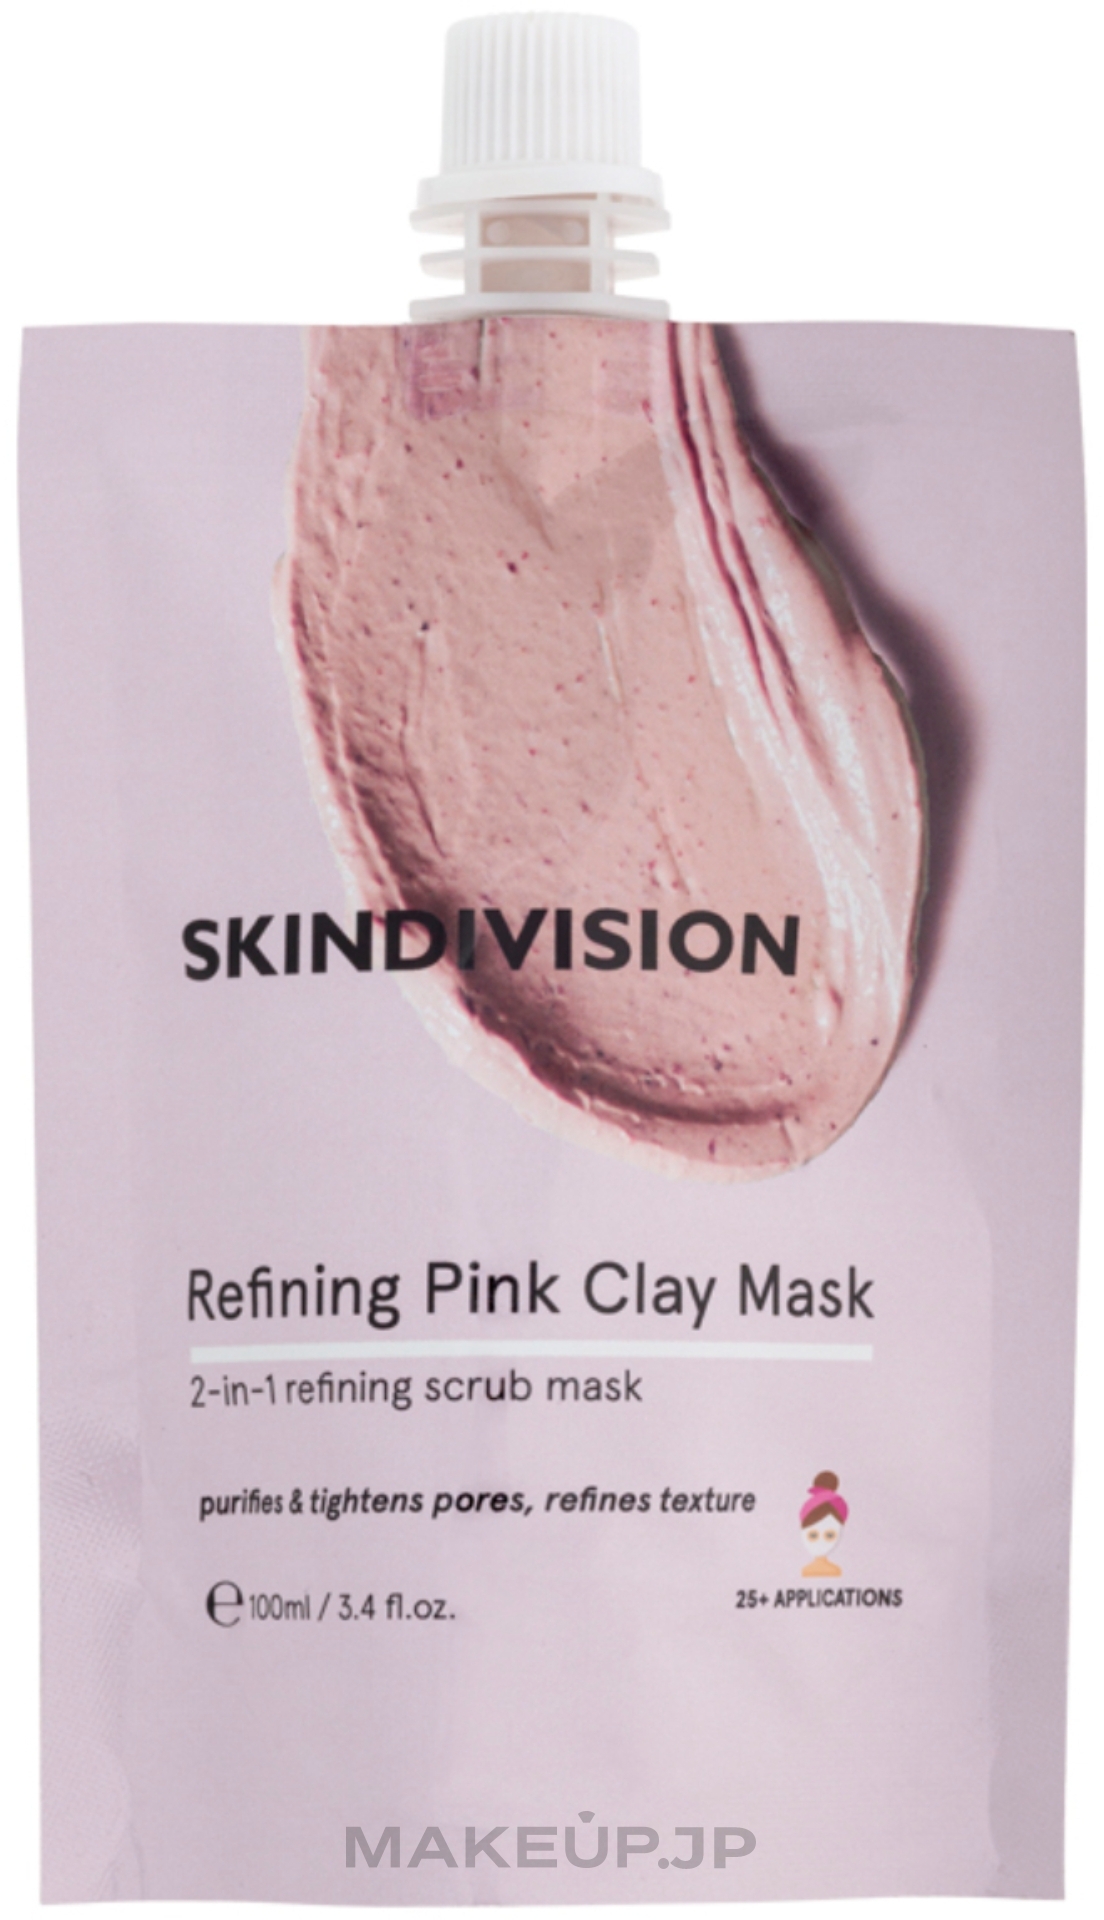 2-in-1 Refining Scrub Mask - SkinDivision Refining Pink Clay Mask — photo 100 ml